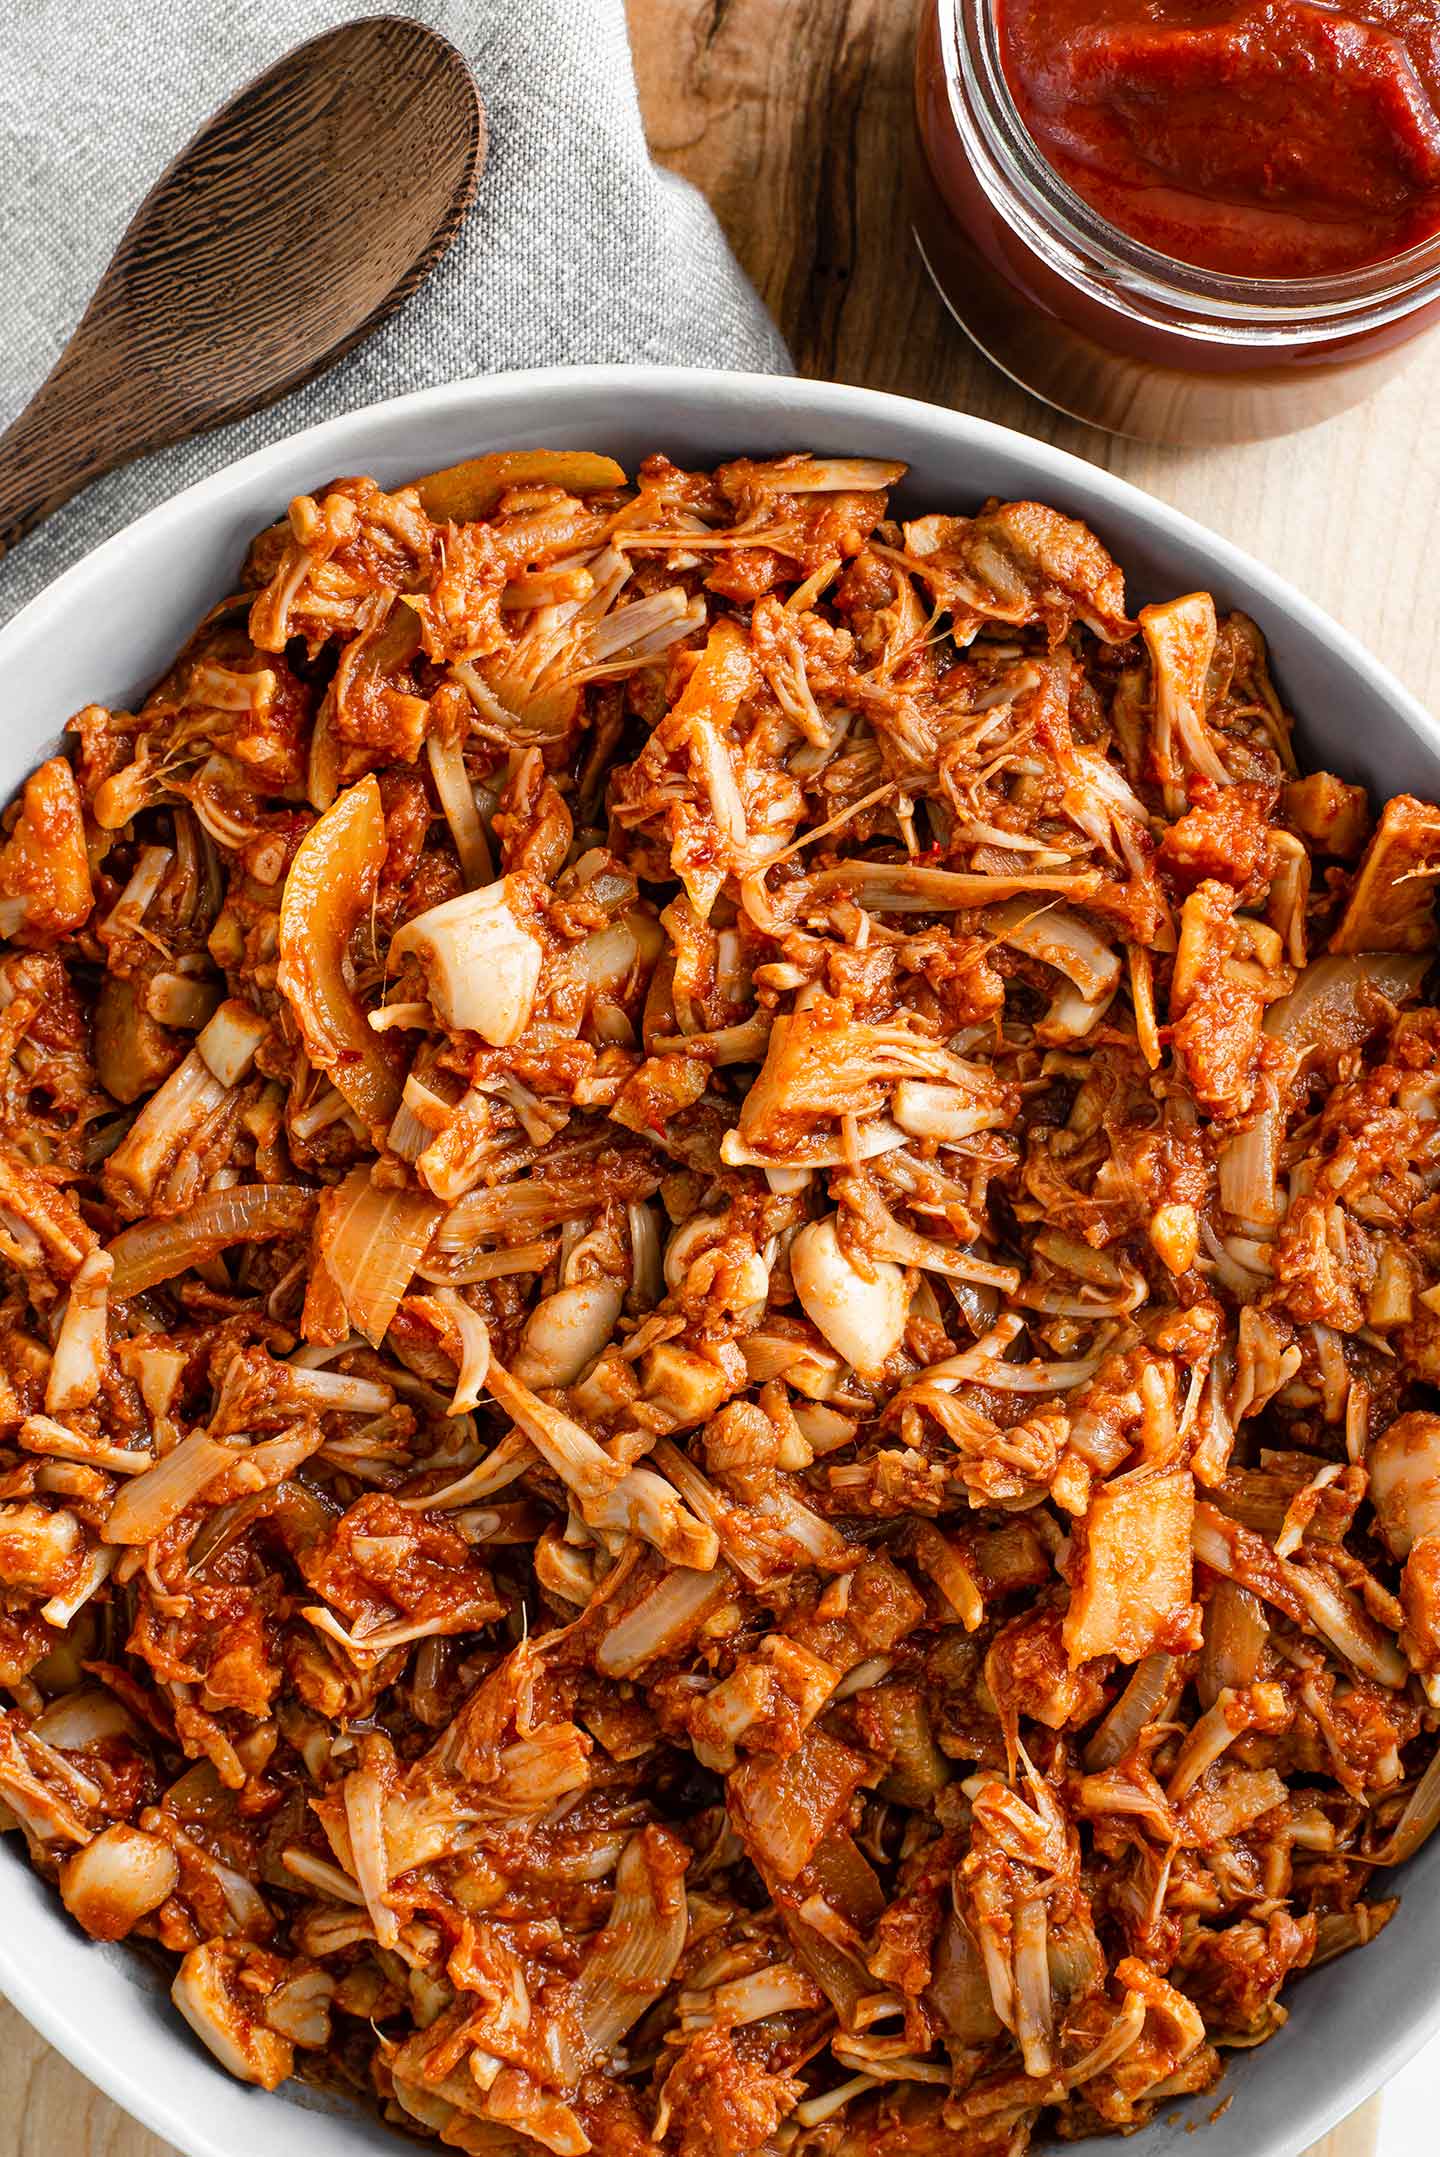 Top down view of BBQ pulled jackfruit in a serving bowl with extra chipotle BBQ sauce on the side.